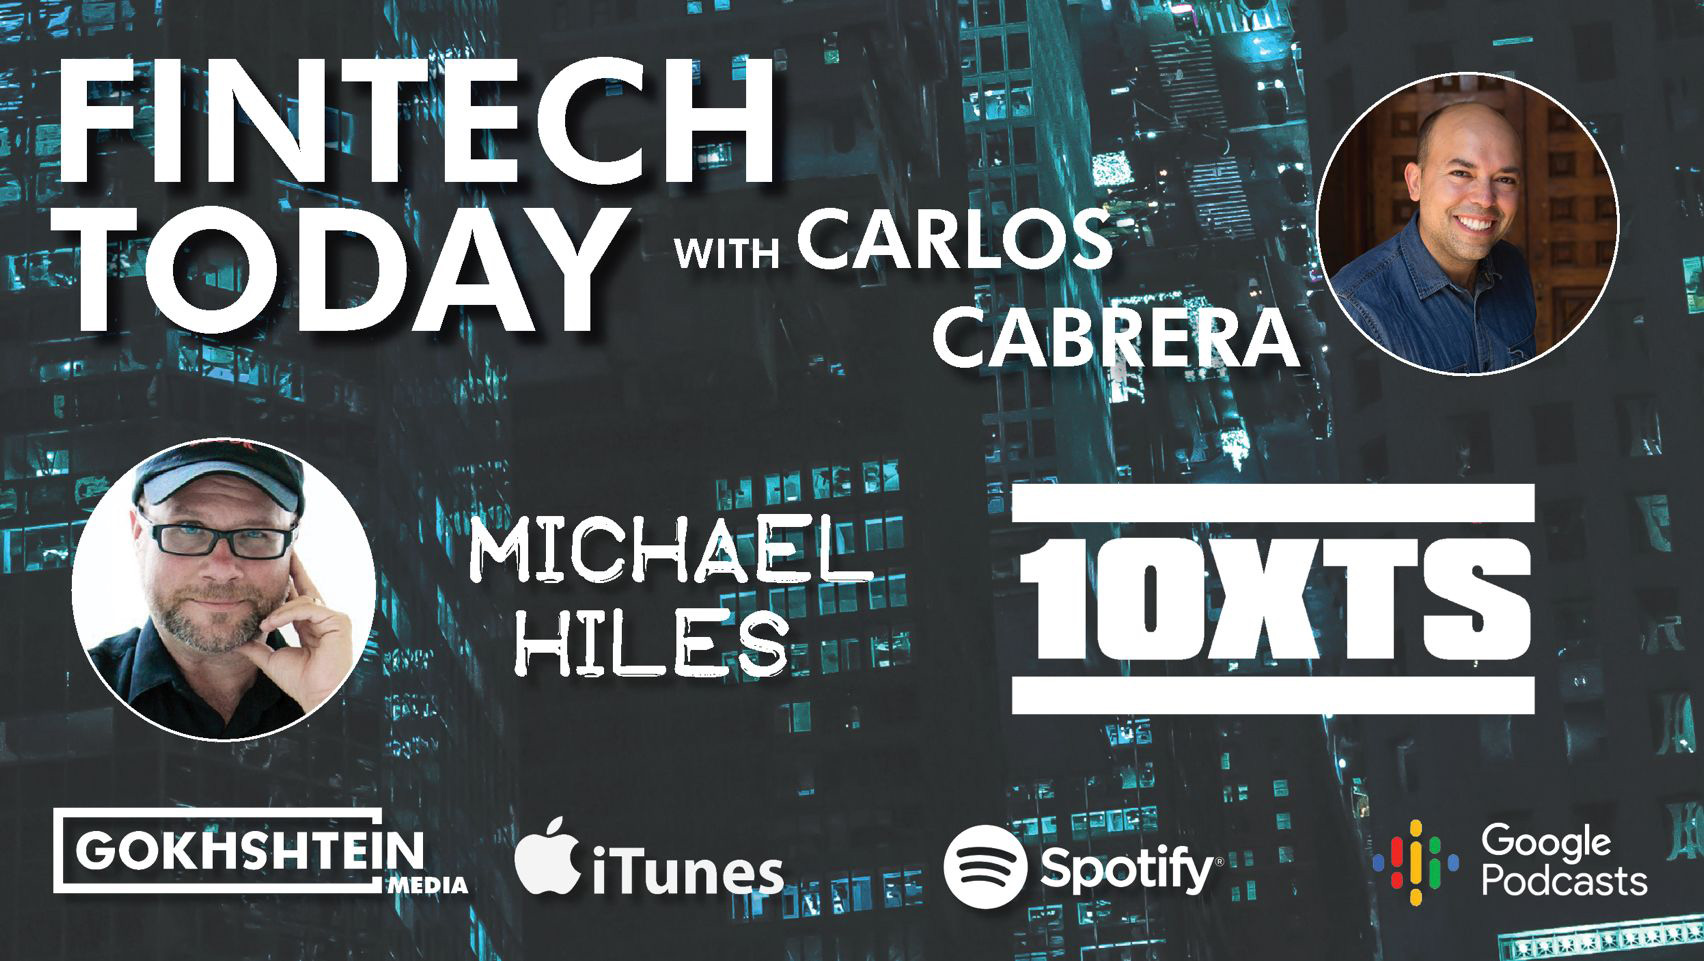 10XTS Fintech Today Podcast Appearance